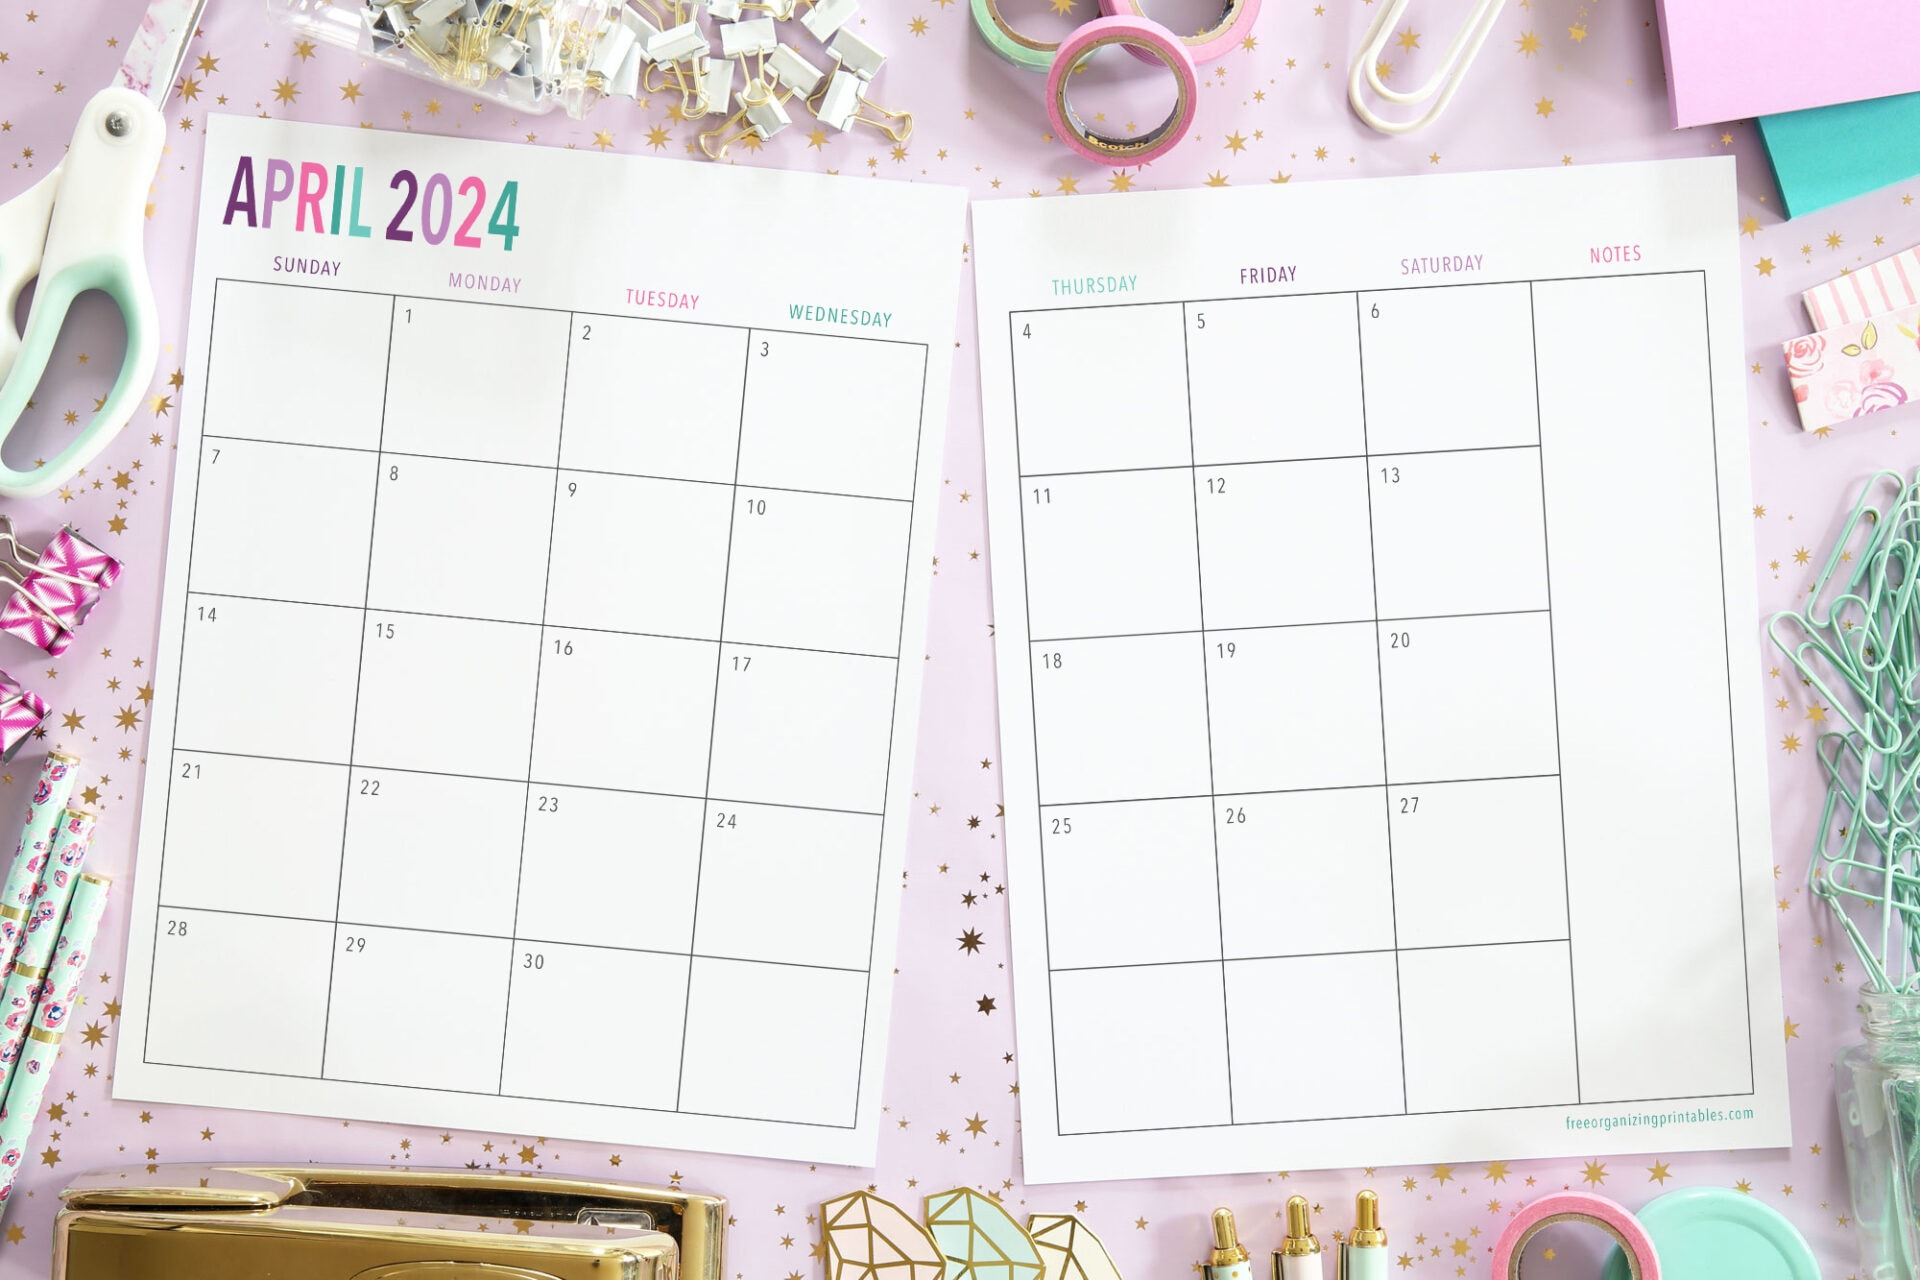 Free Printable 2 Page Blank Monthly Calendar 2024 | Printable Calendar 2024 Monthly Planner